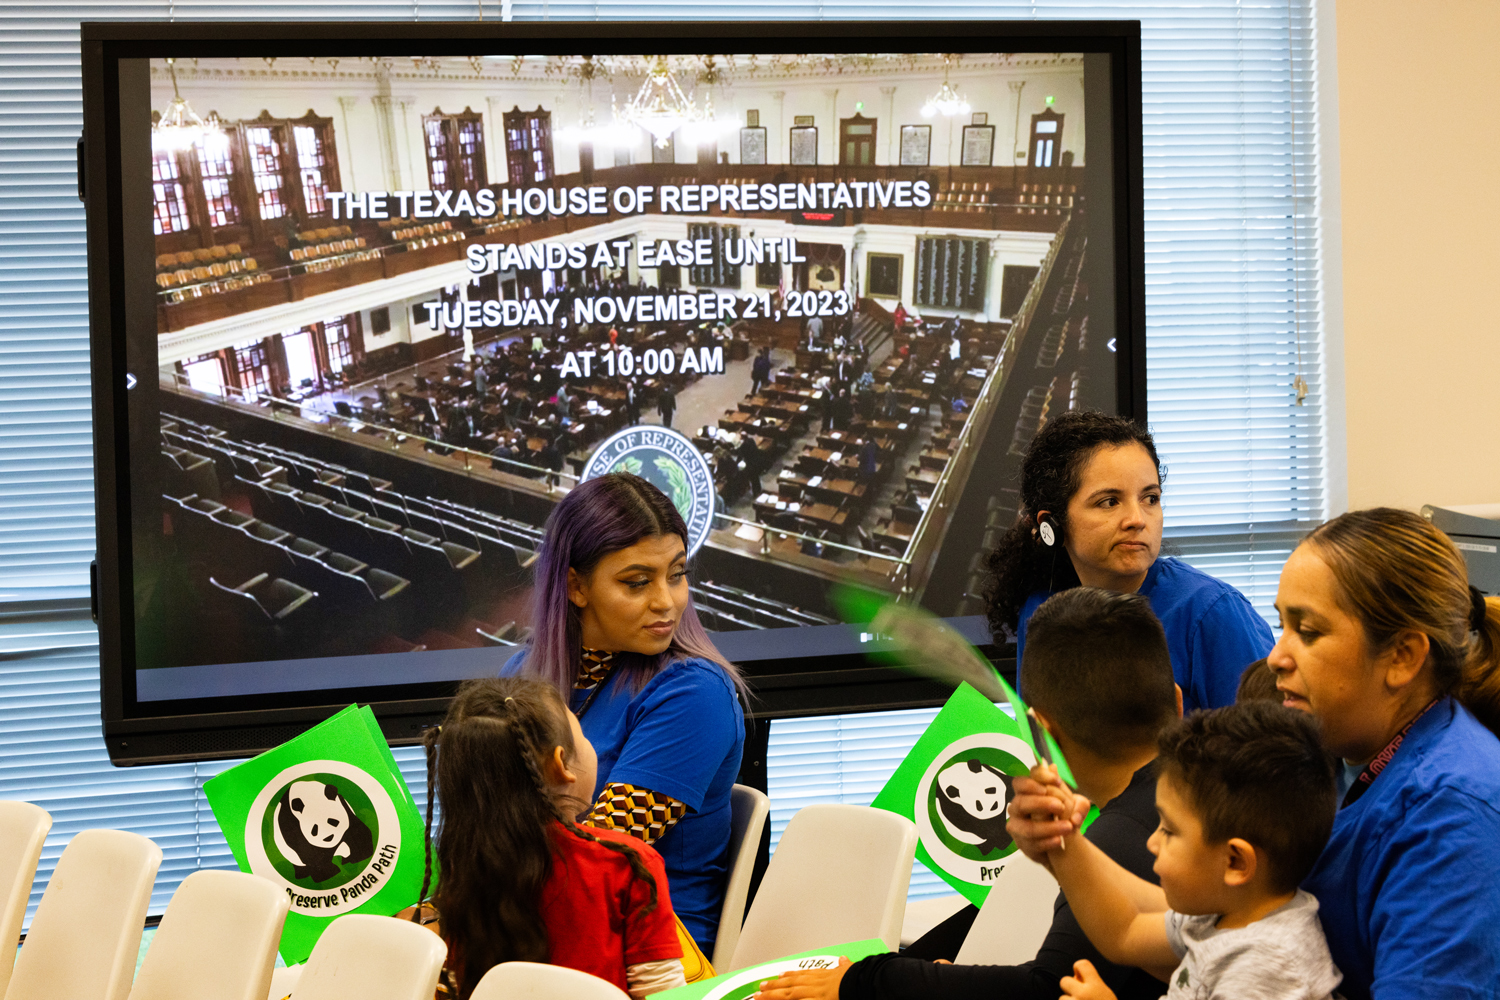 Yamileth Alvarado and her daughter Yvonne Aleman, 4, sit in front of a television screen announcing the end of a Texas House of Representatives meeting on which the legislators voted to strip school vouchers from the chamber’s education funding bill, Friday, Nov. 17, 2023, in Houston